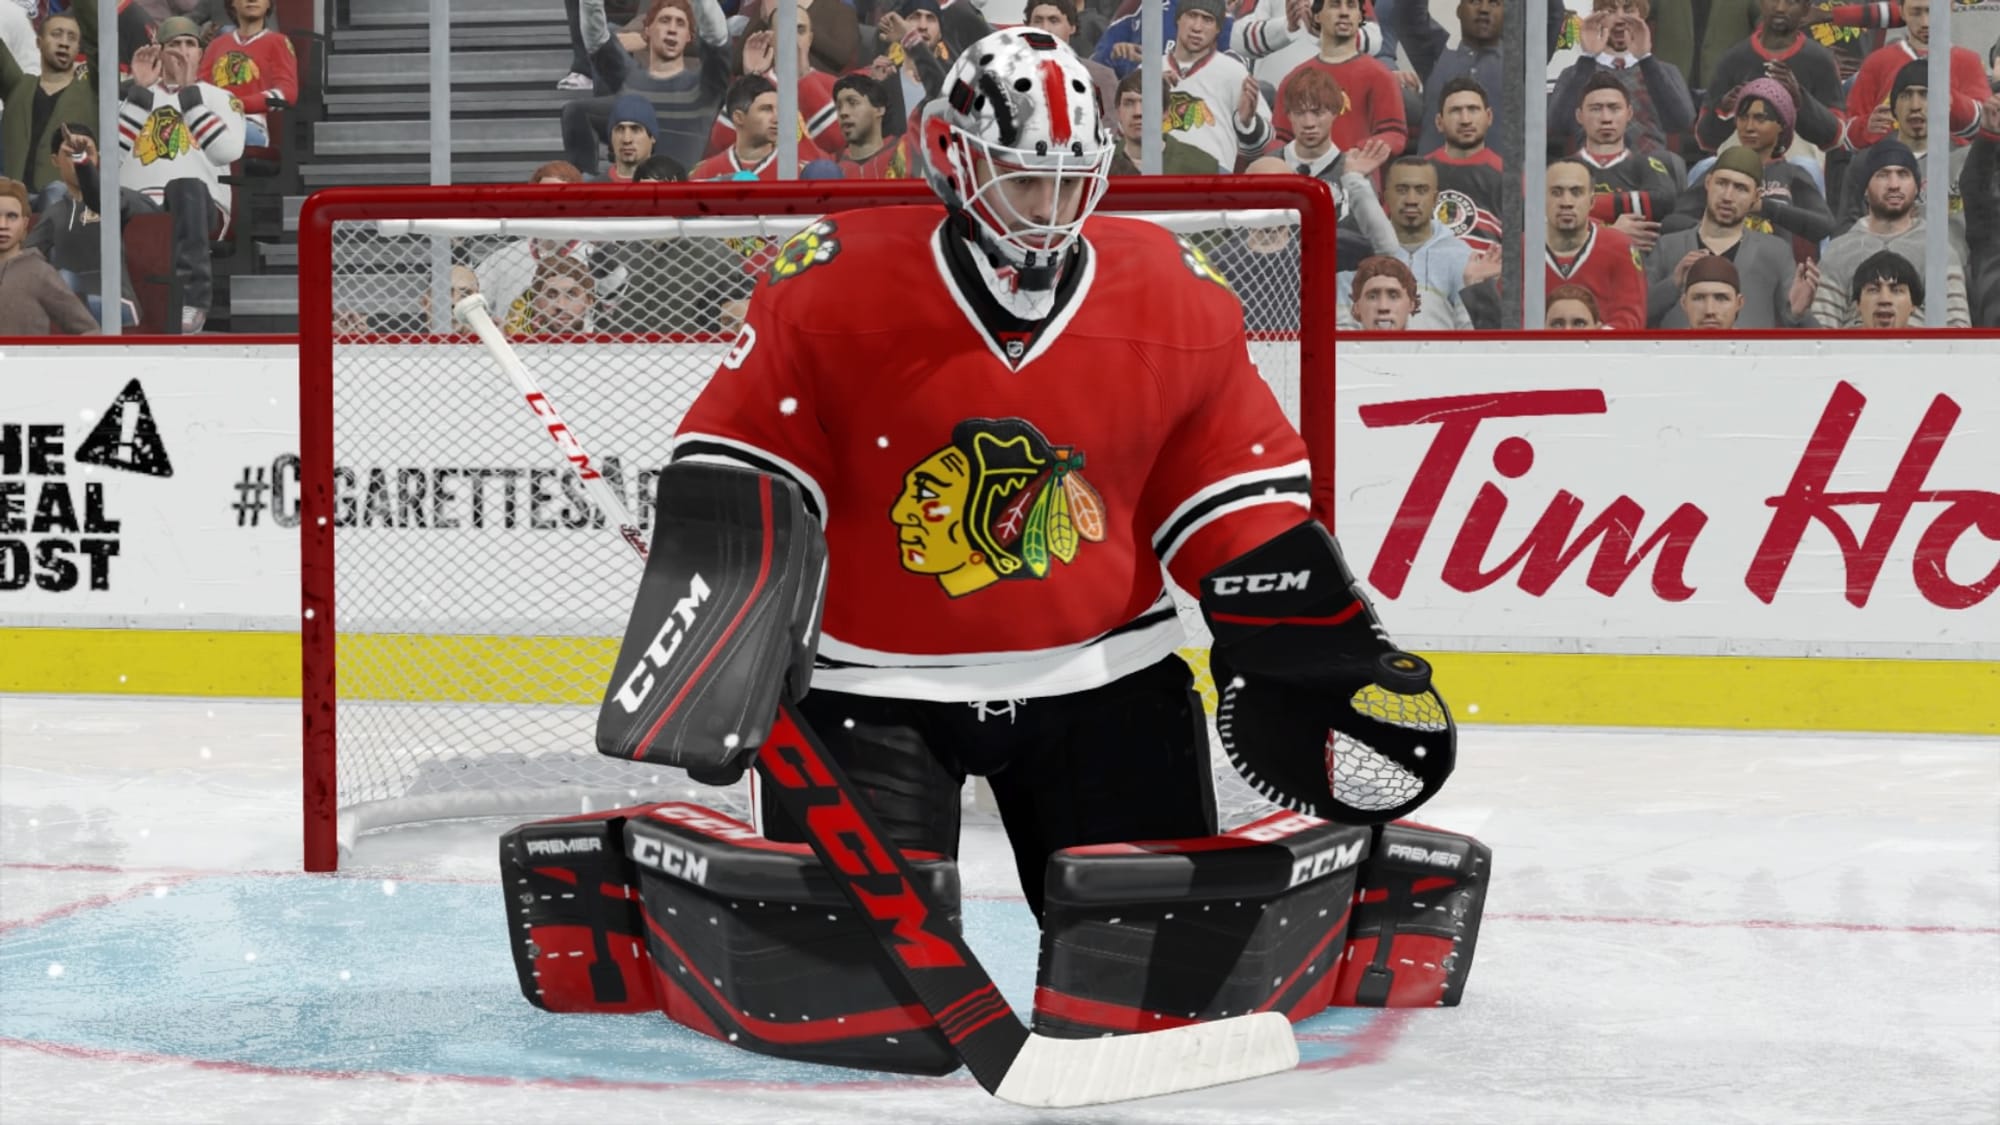 download 17 nhl for free